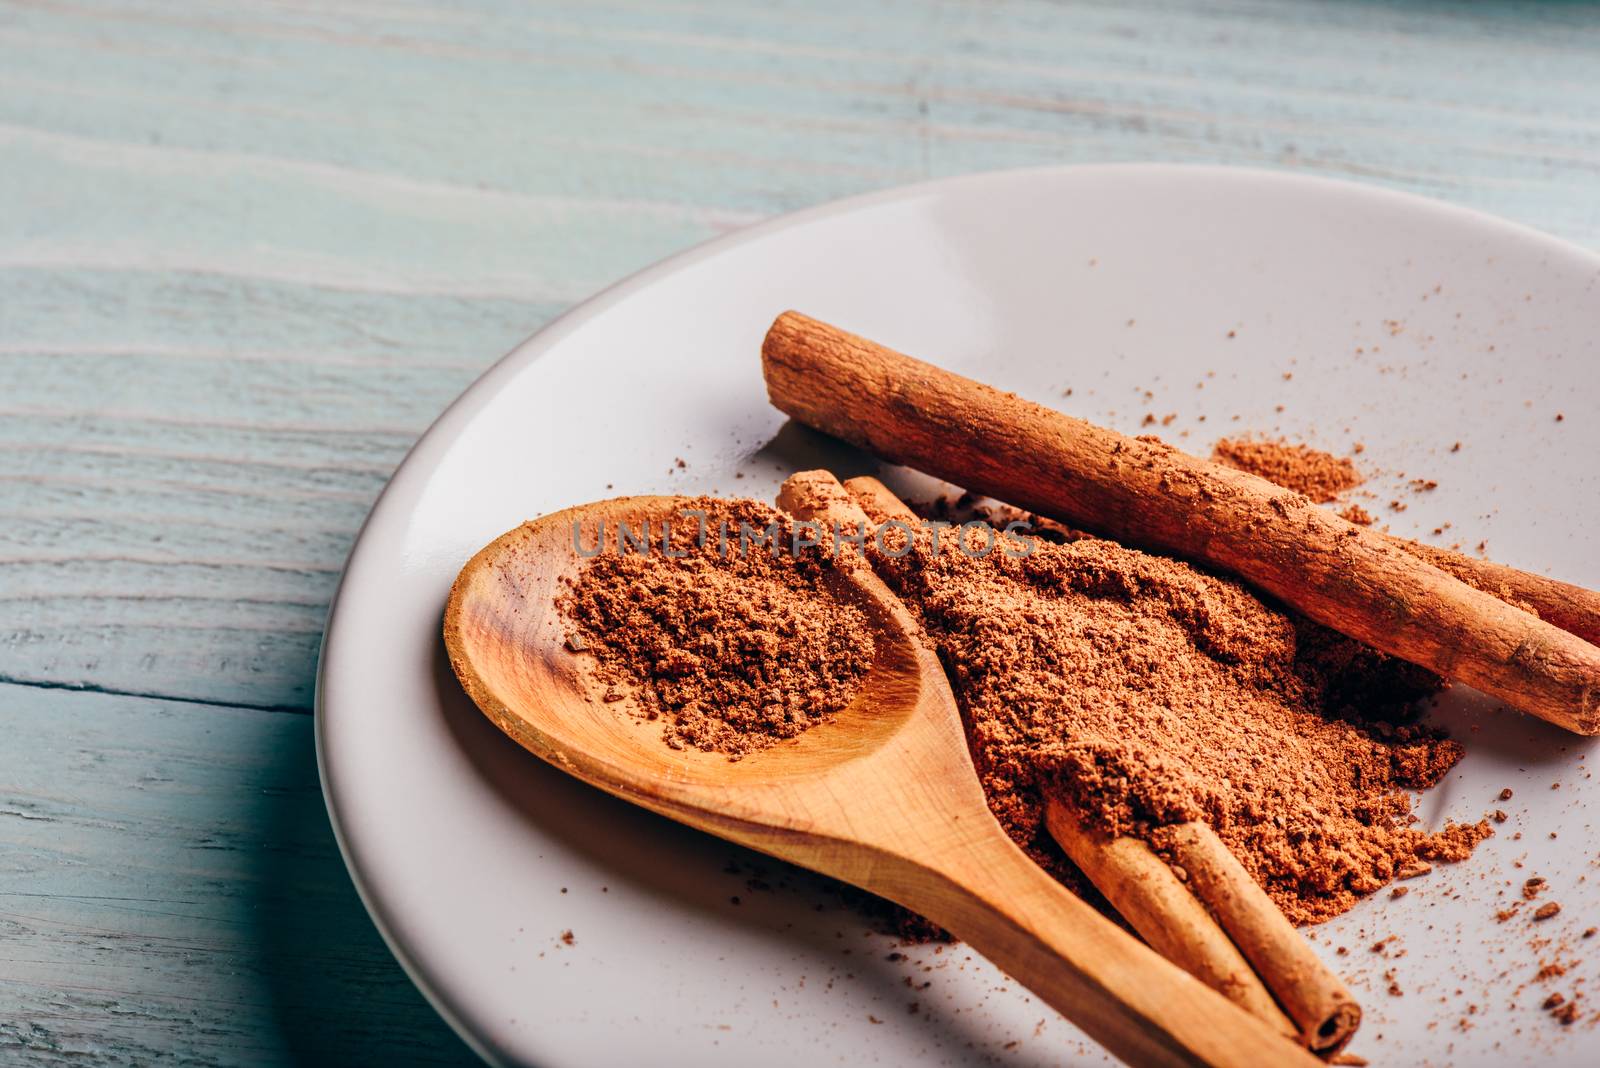 Cinnamon sticks and ground spice on white plate over light wooden background.